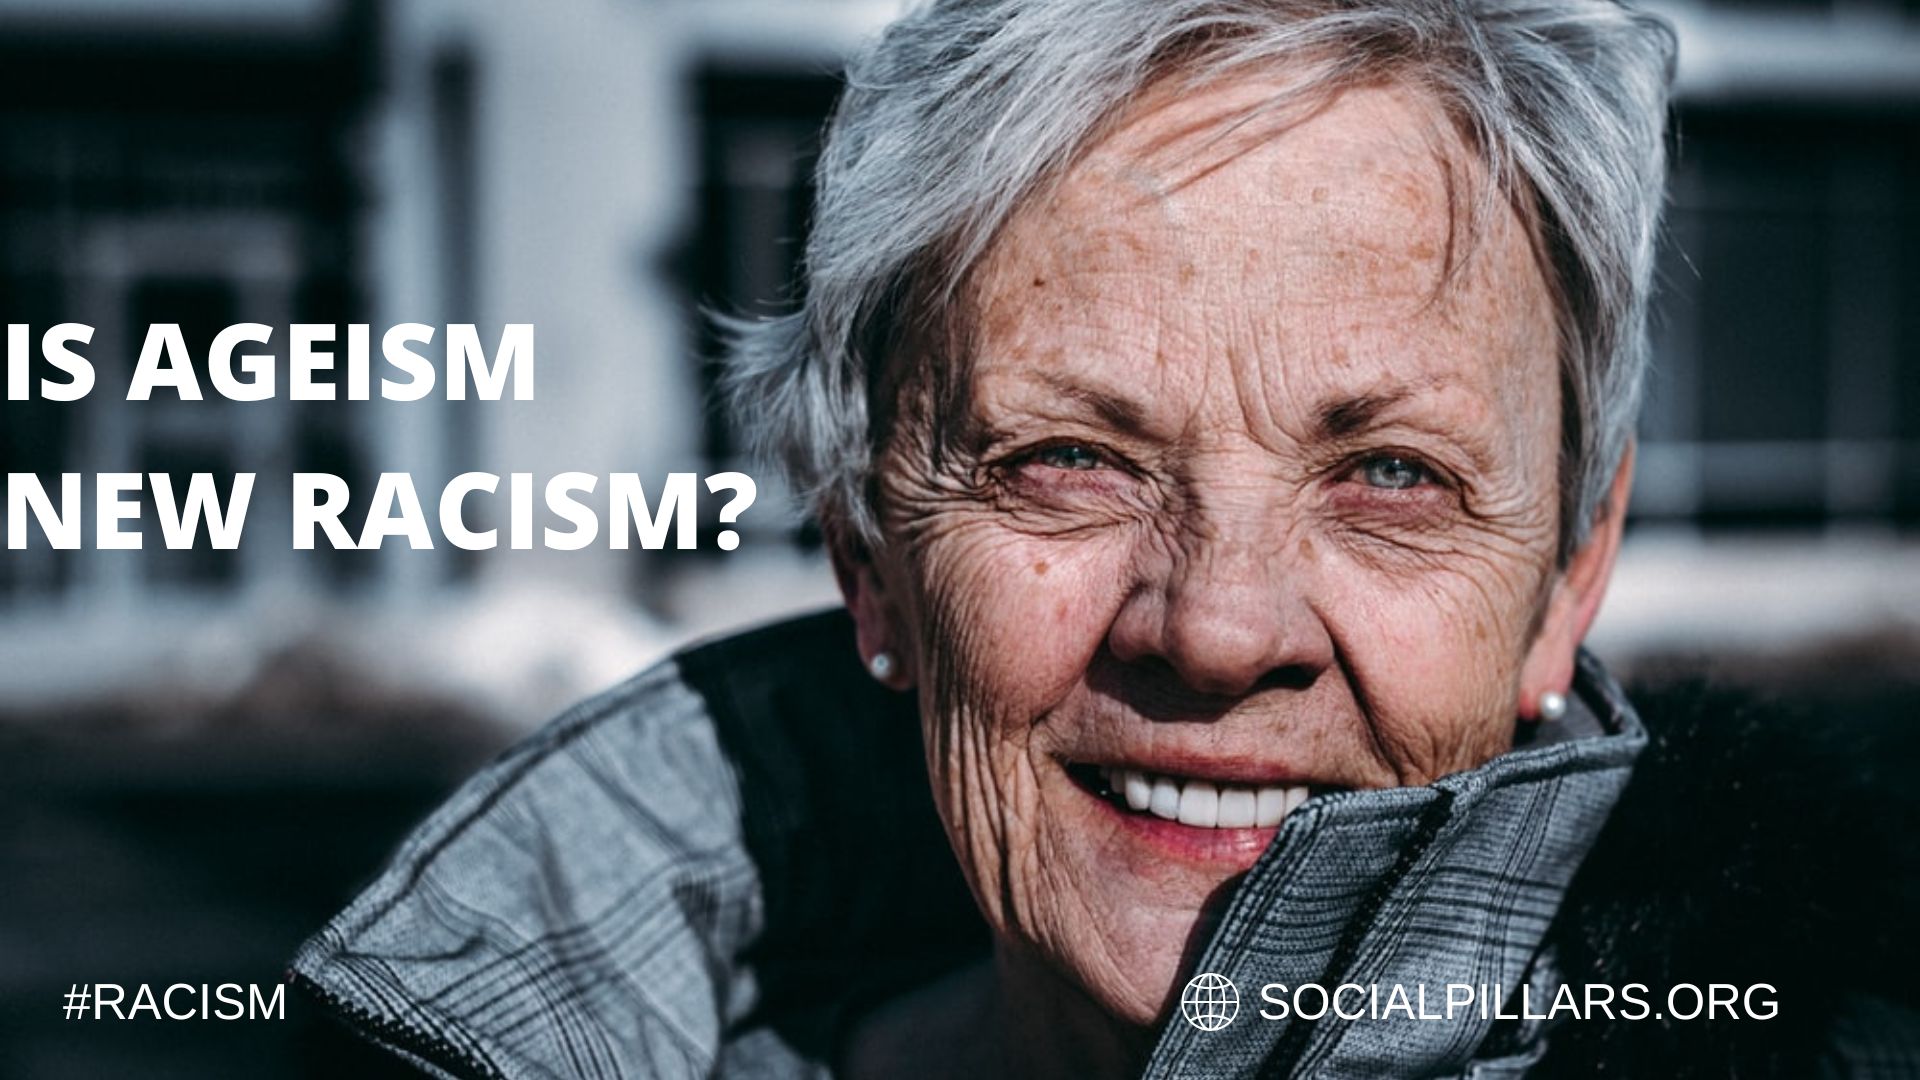 IS AGEISM NEW RACISM